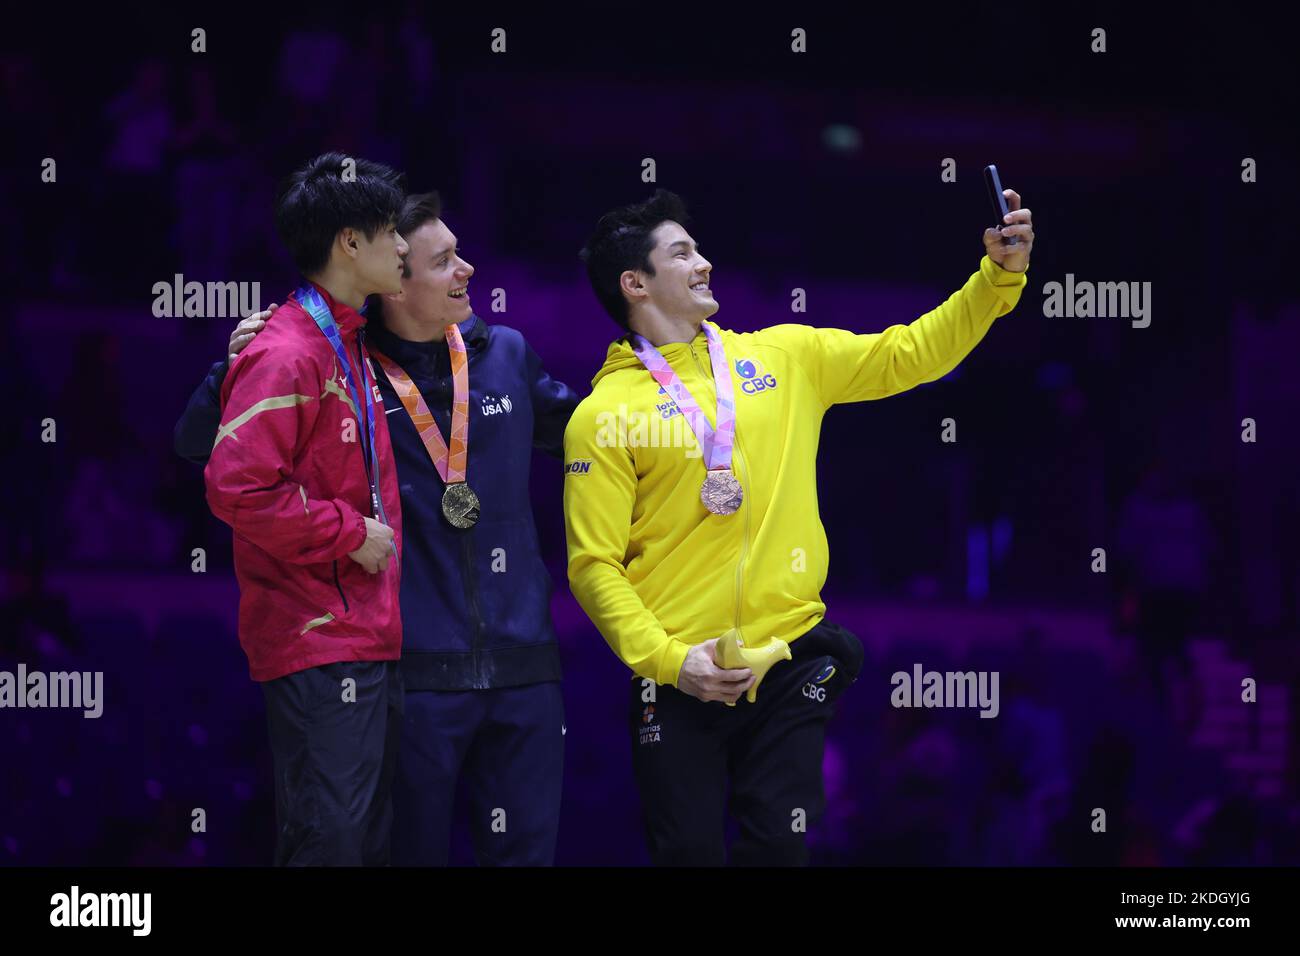 November 6, 2022: Brody Malone (USA) wins gold on the horizontal bar at the 2022 Artistic Gymnastics World Championships. Daiki Hashimoto (JPN) wins silver and Arthur Mariano (BRA) takes bronze. The medalists pause for a selfie on the podium. The event is at M&S Bank Arena in Liverpool, England. Melissa J. Perenson/CSM Stock Photo